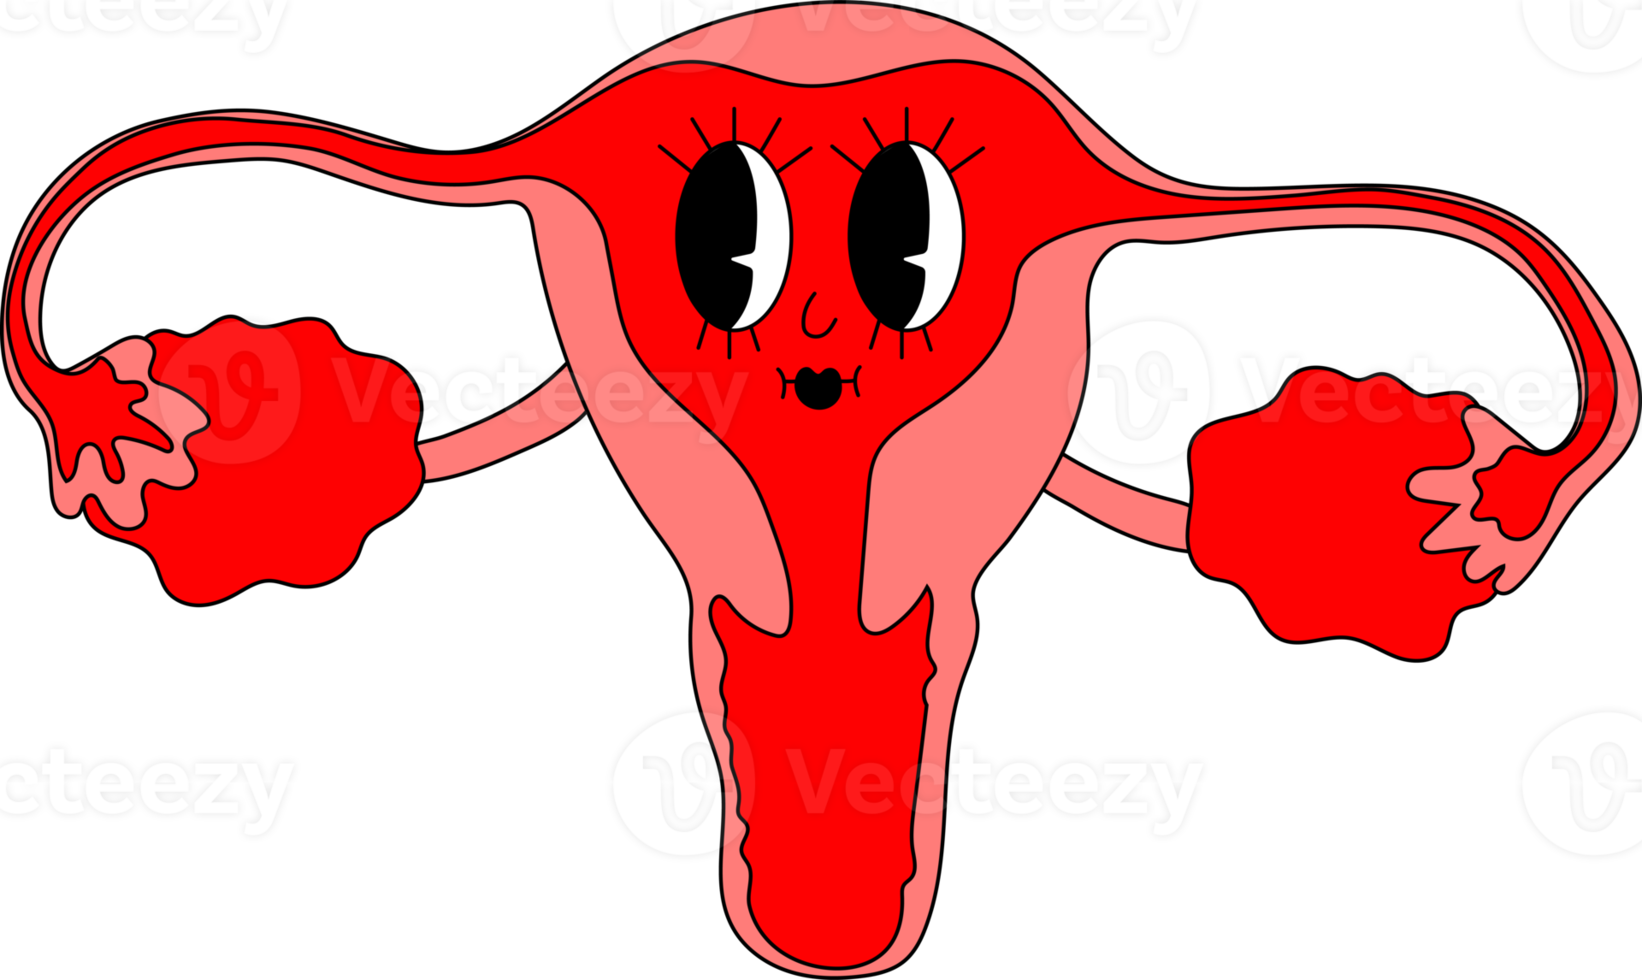 Retro funny mascot character -. 40s, 50s, 60s old animation style. organ character female reproductive system uterus cervix ovaries and fallopian tubes anatomy biology medicine. png